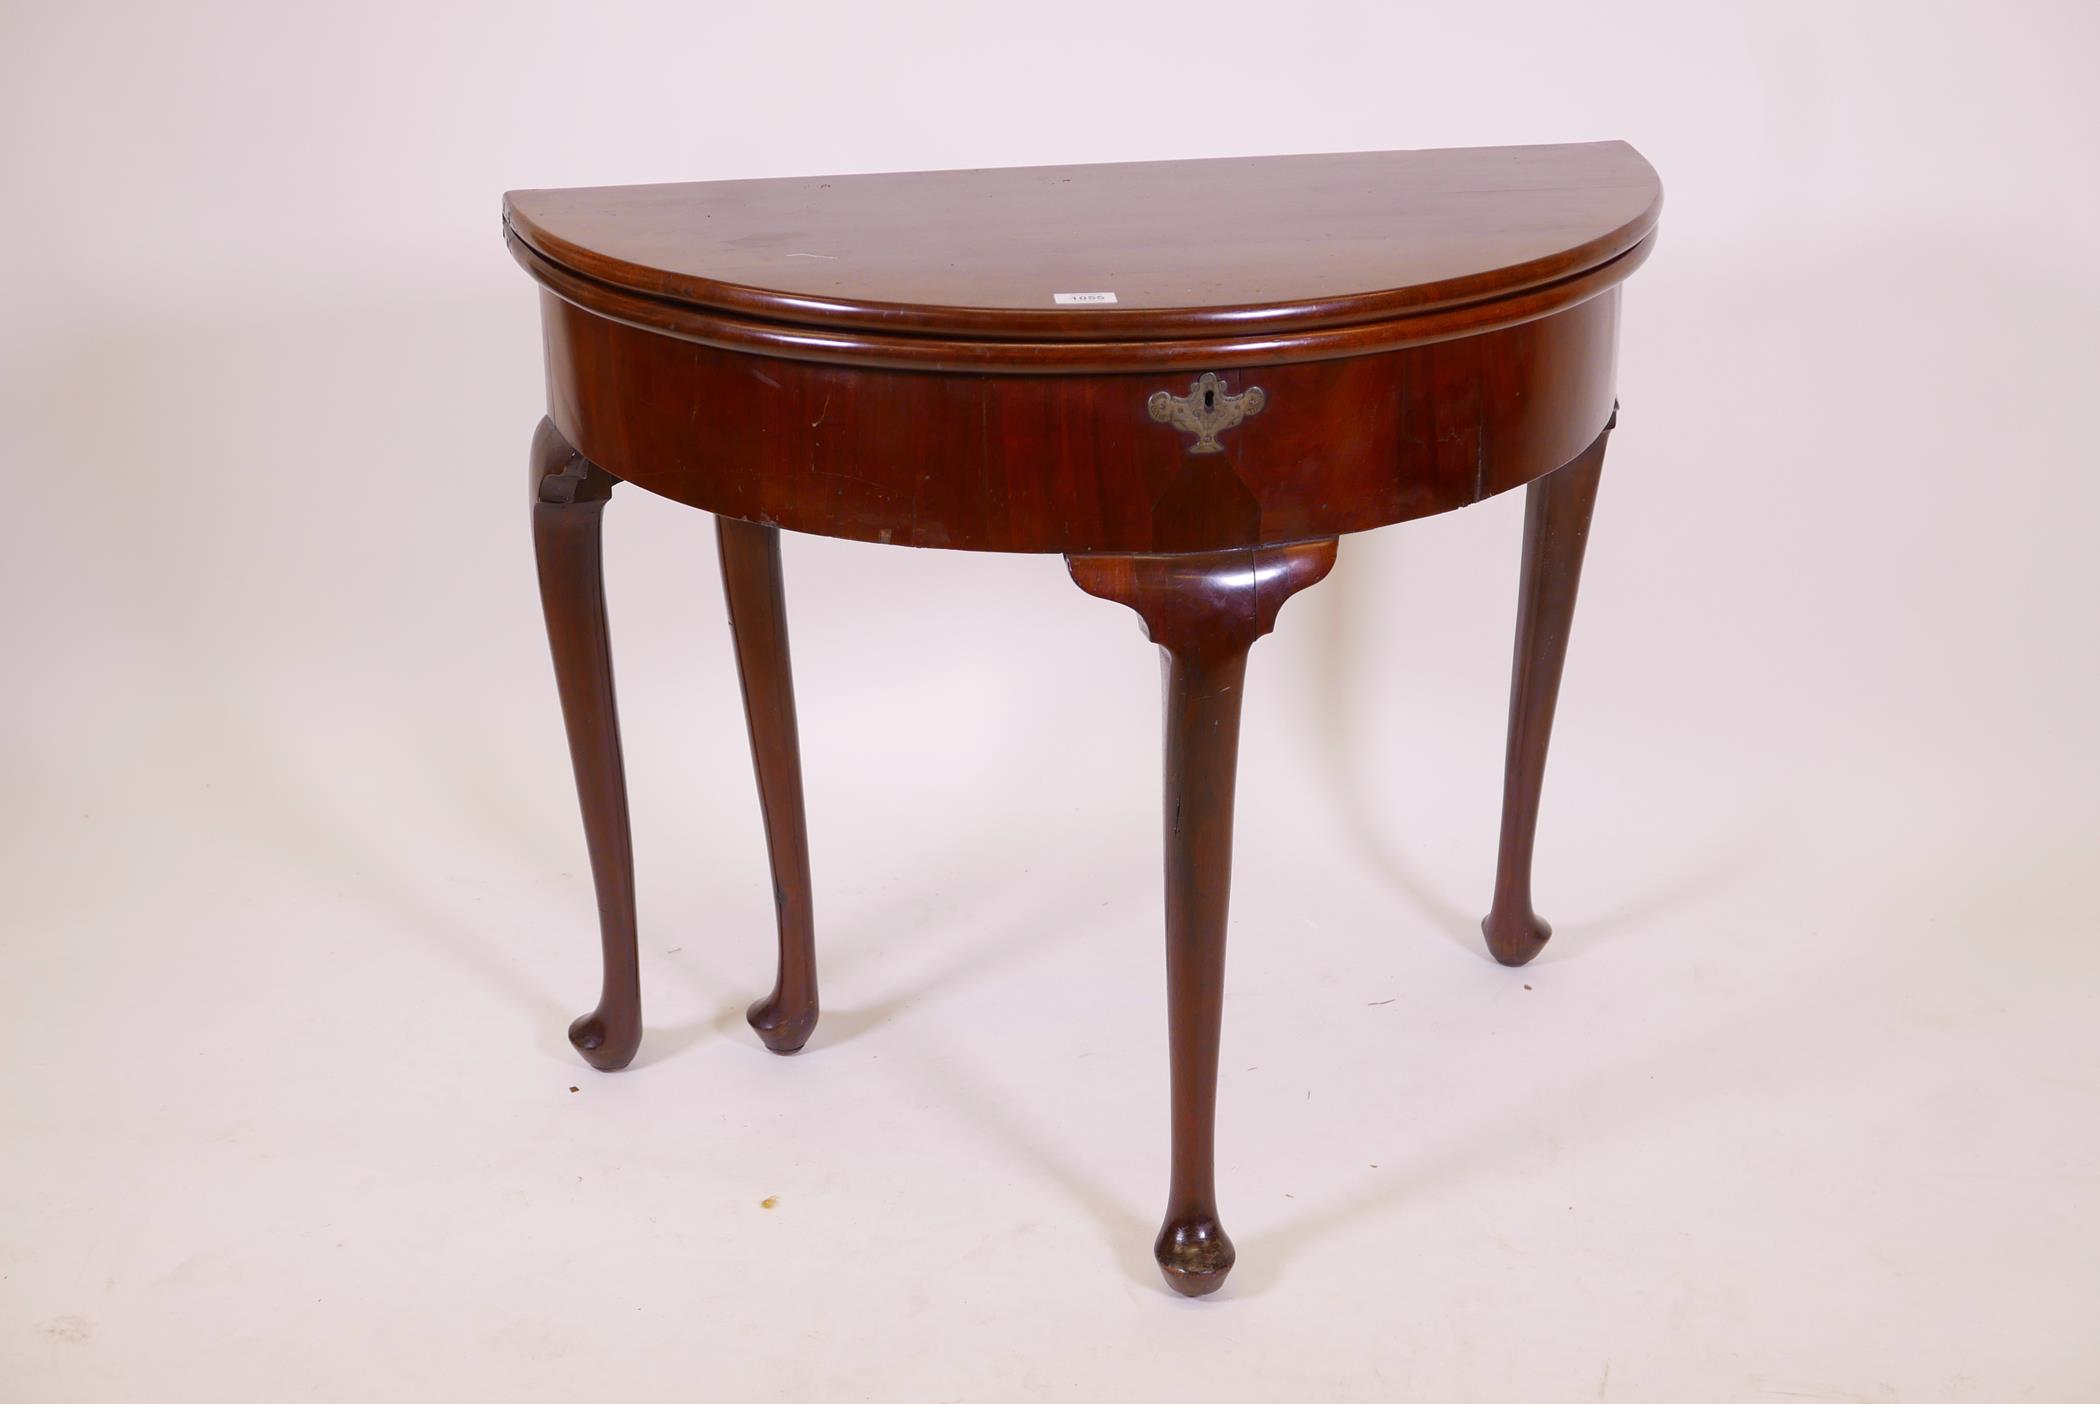 A Georgian mahogany demi lune card table, with two folding leaves opening to reveal a well, raised